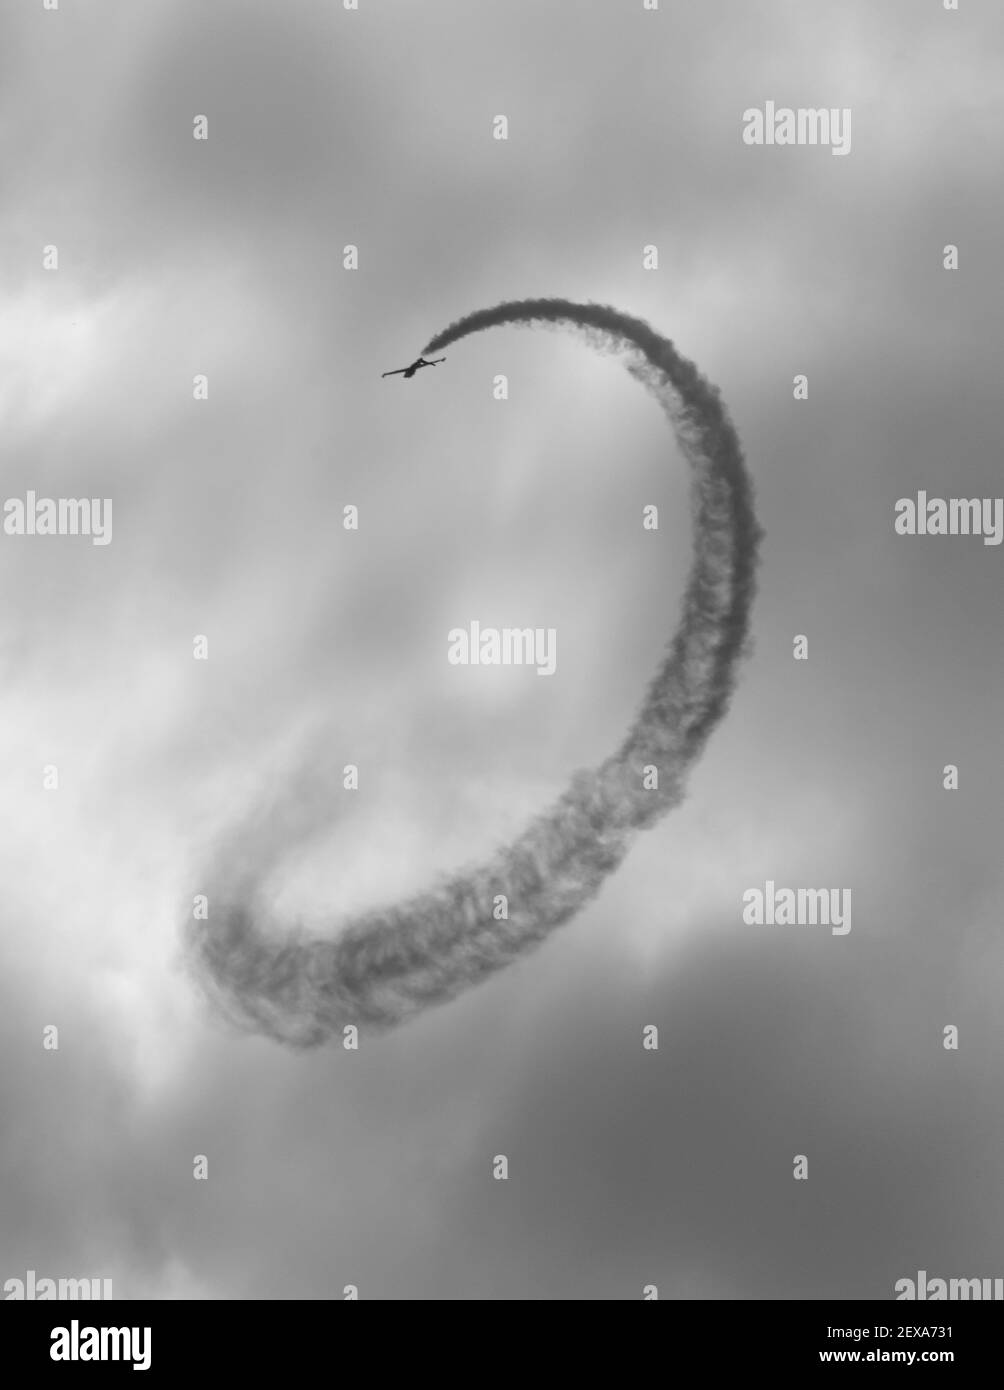 Plane doing a looping stunt with a cloudy sky Stock Photo